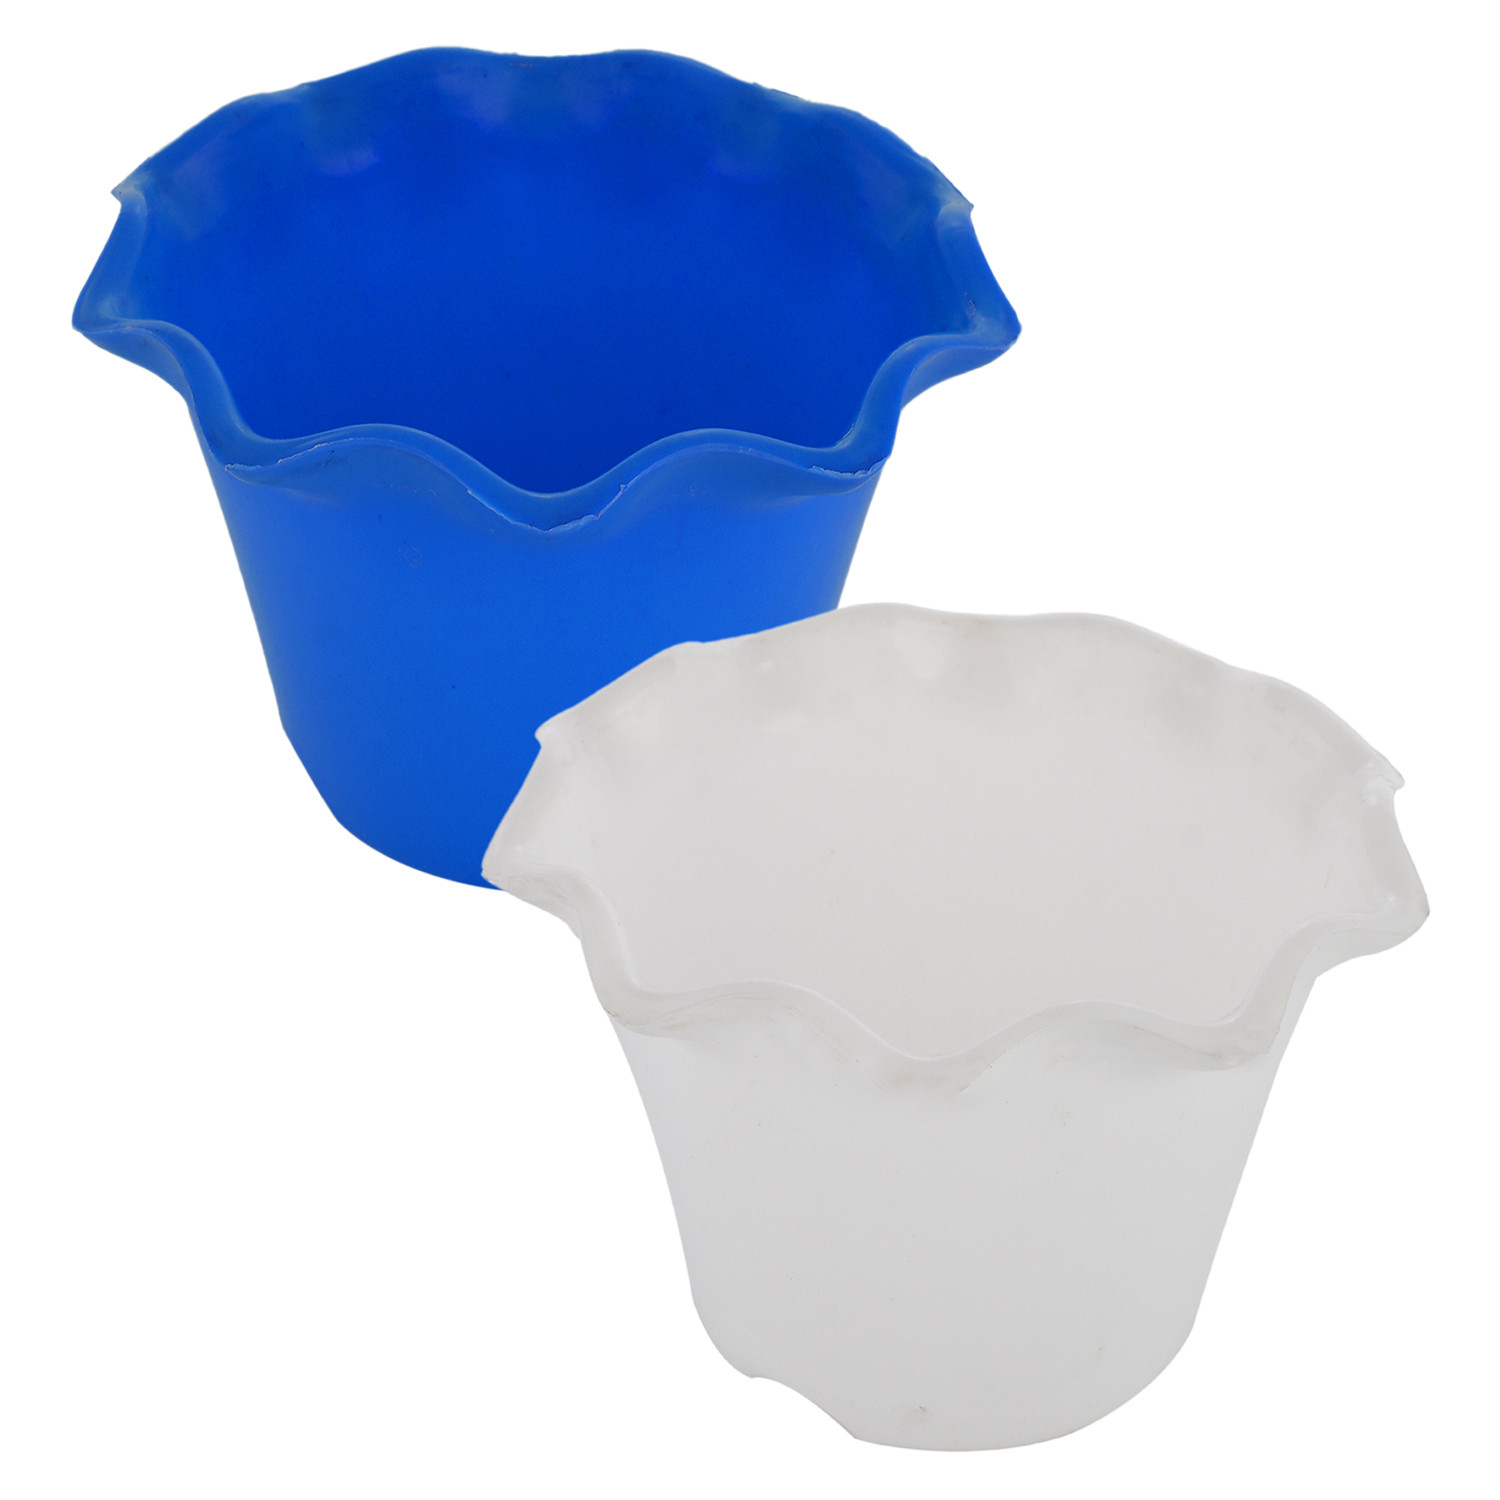 Kuber Industries Blossom Flower Pot|Durable Plastic Flower Pot|Gamla With Drain Holes for Home Décor|Balcony|Garden|8 Inch|Pack of 2 (White & Blue)